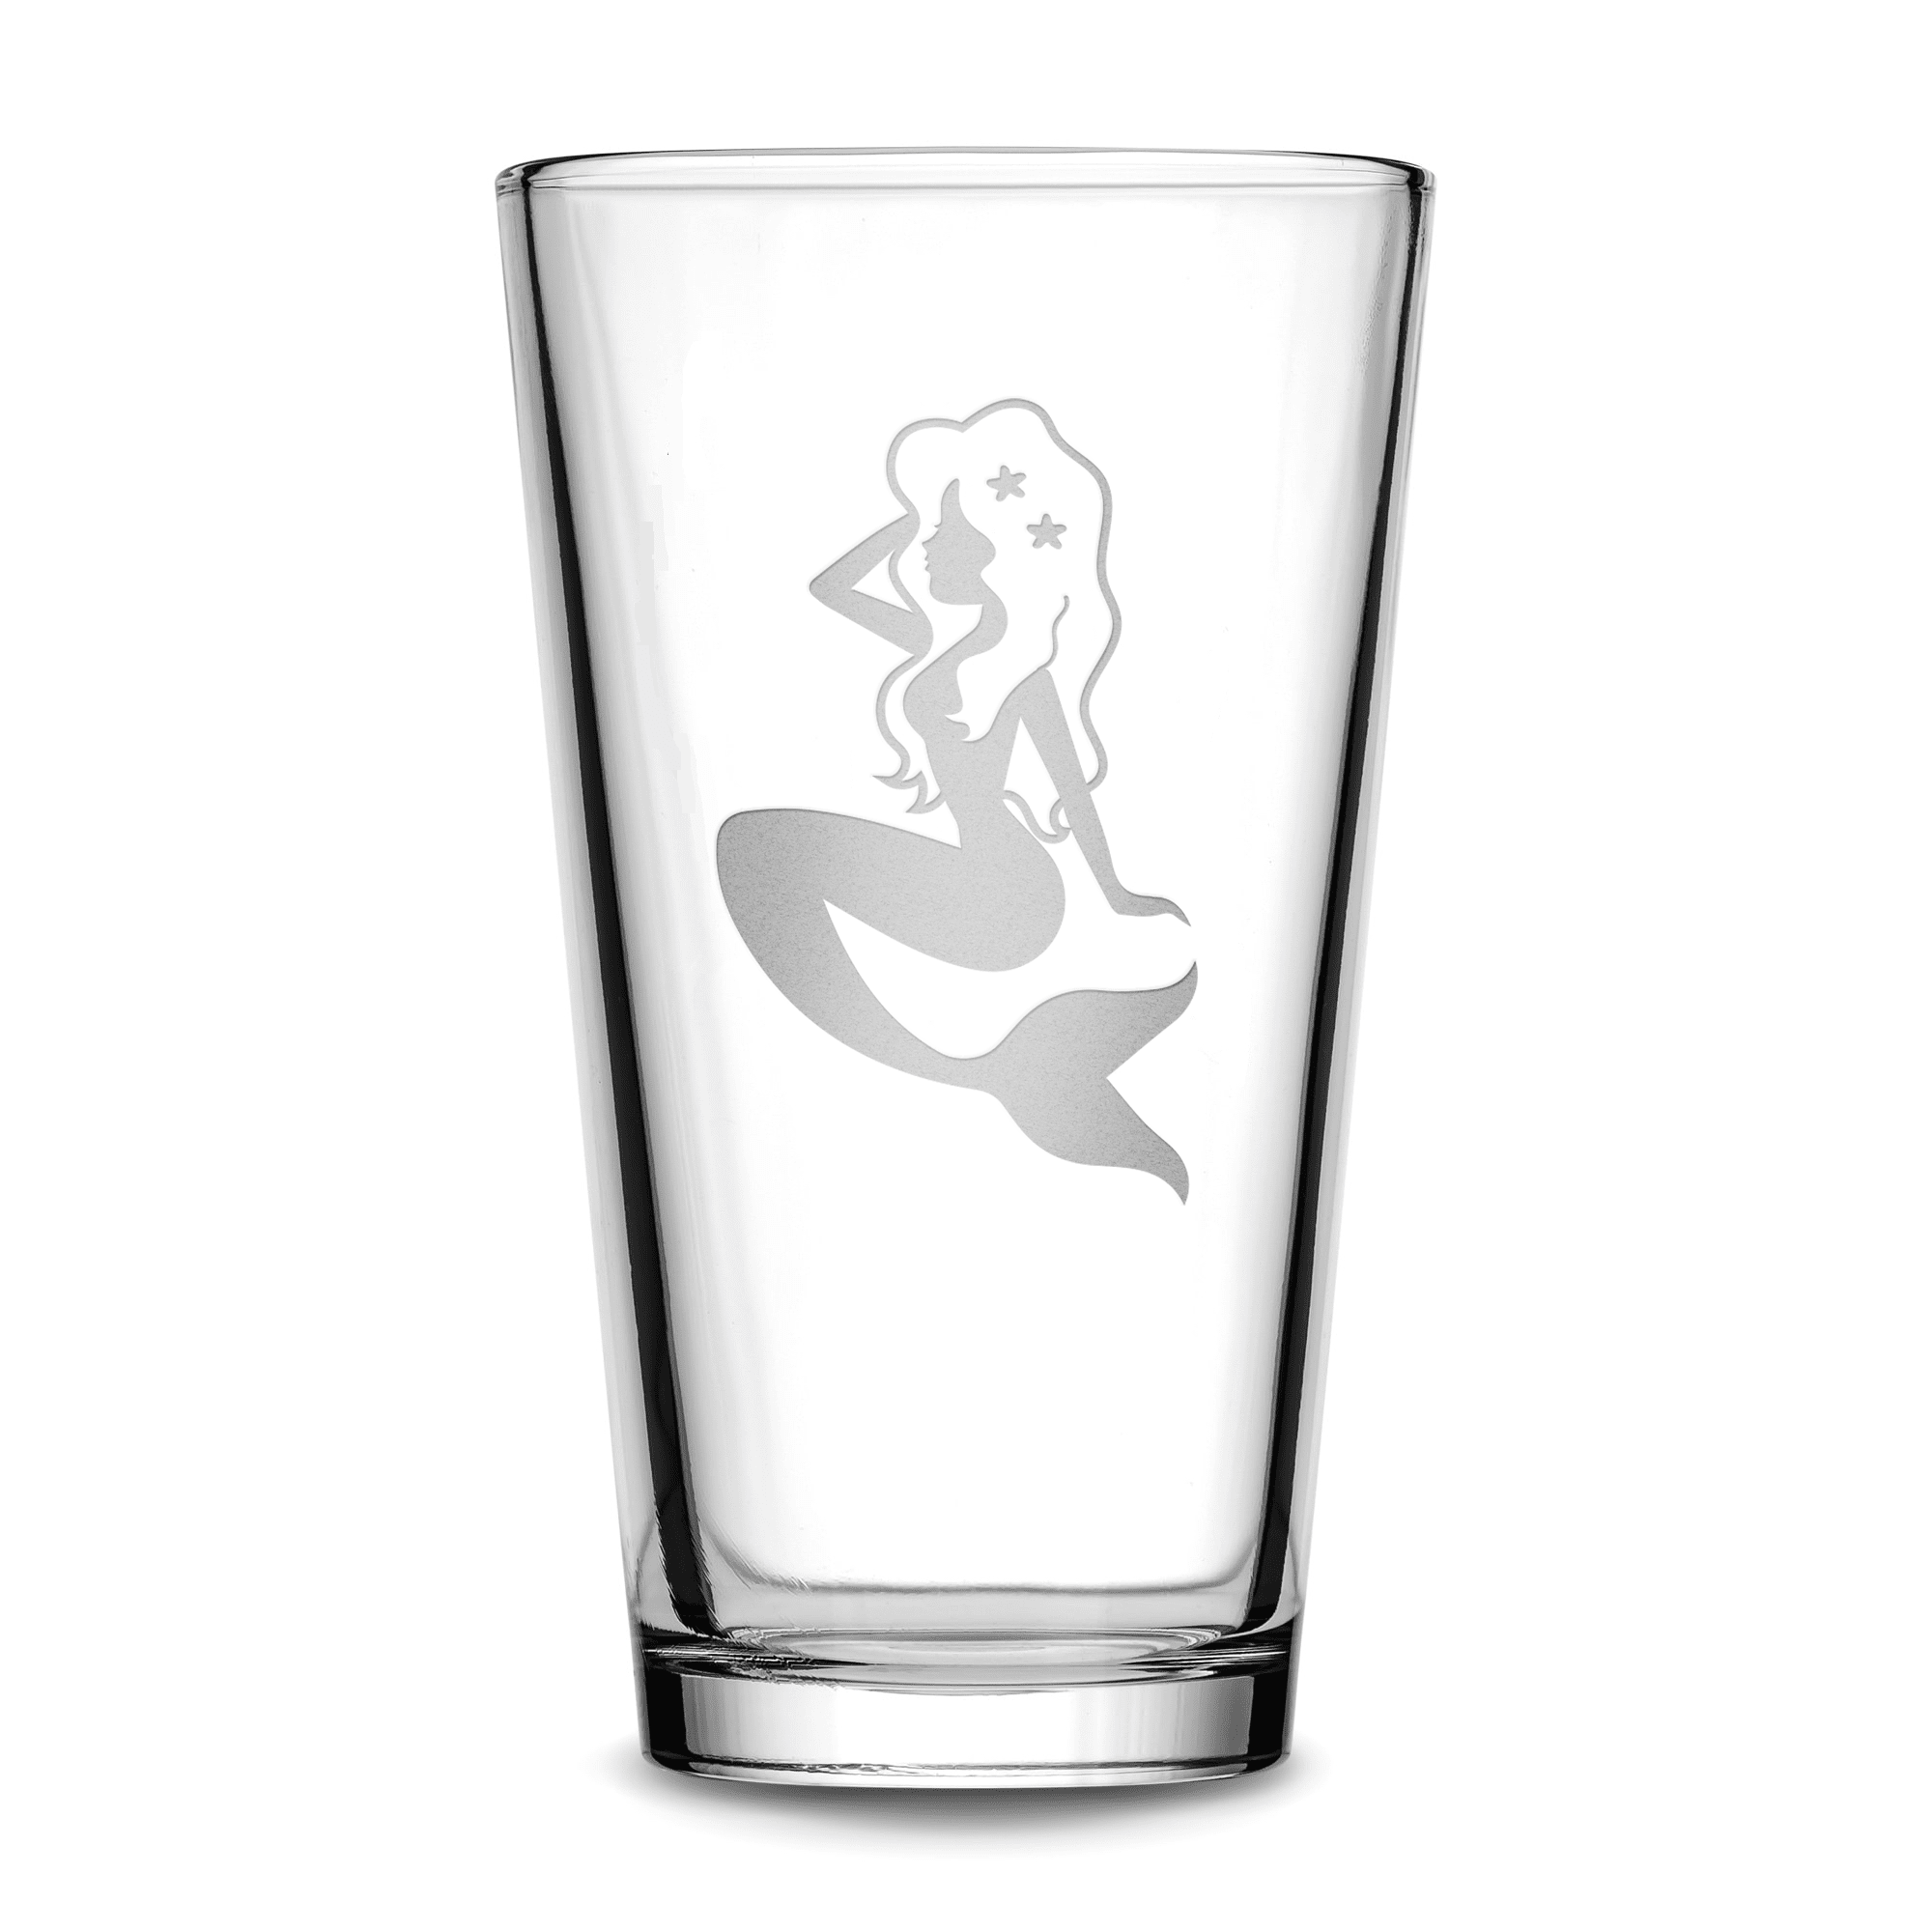 Pint Glass with Mermaid Design, Deep Etched by Integrity Bottles